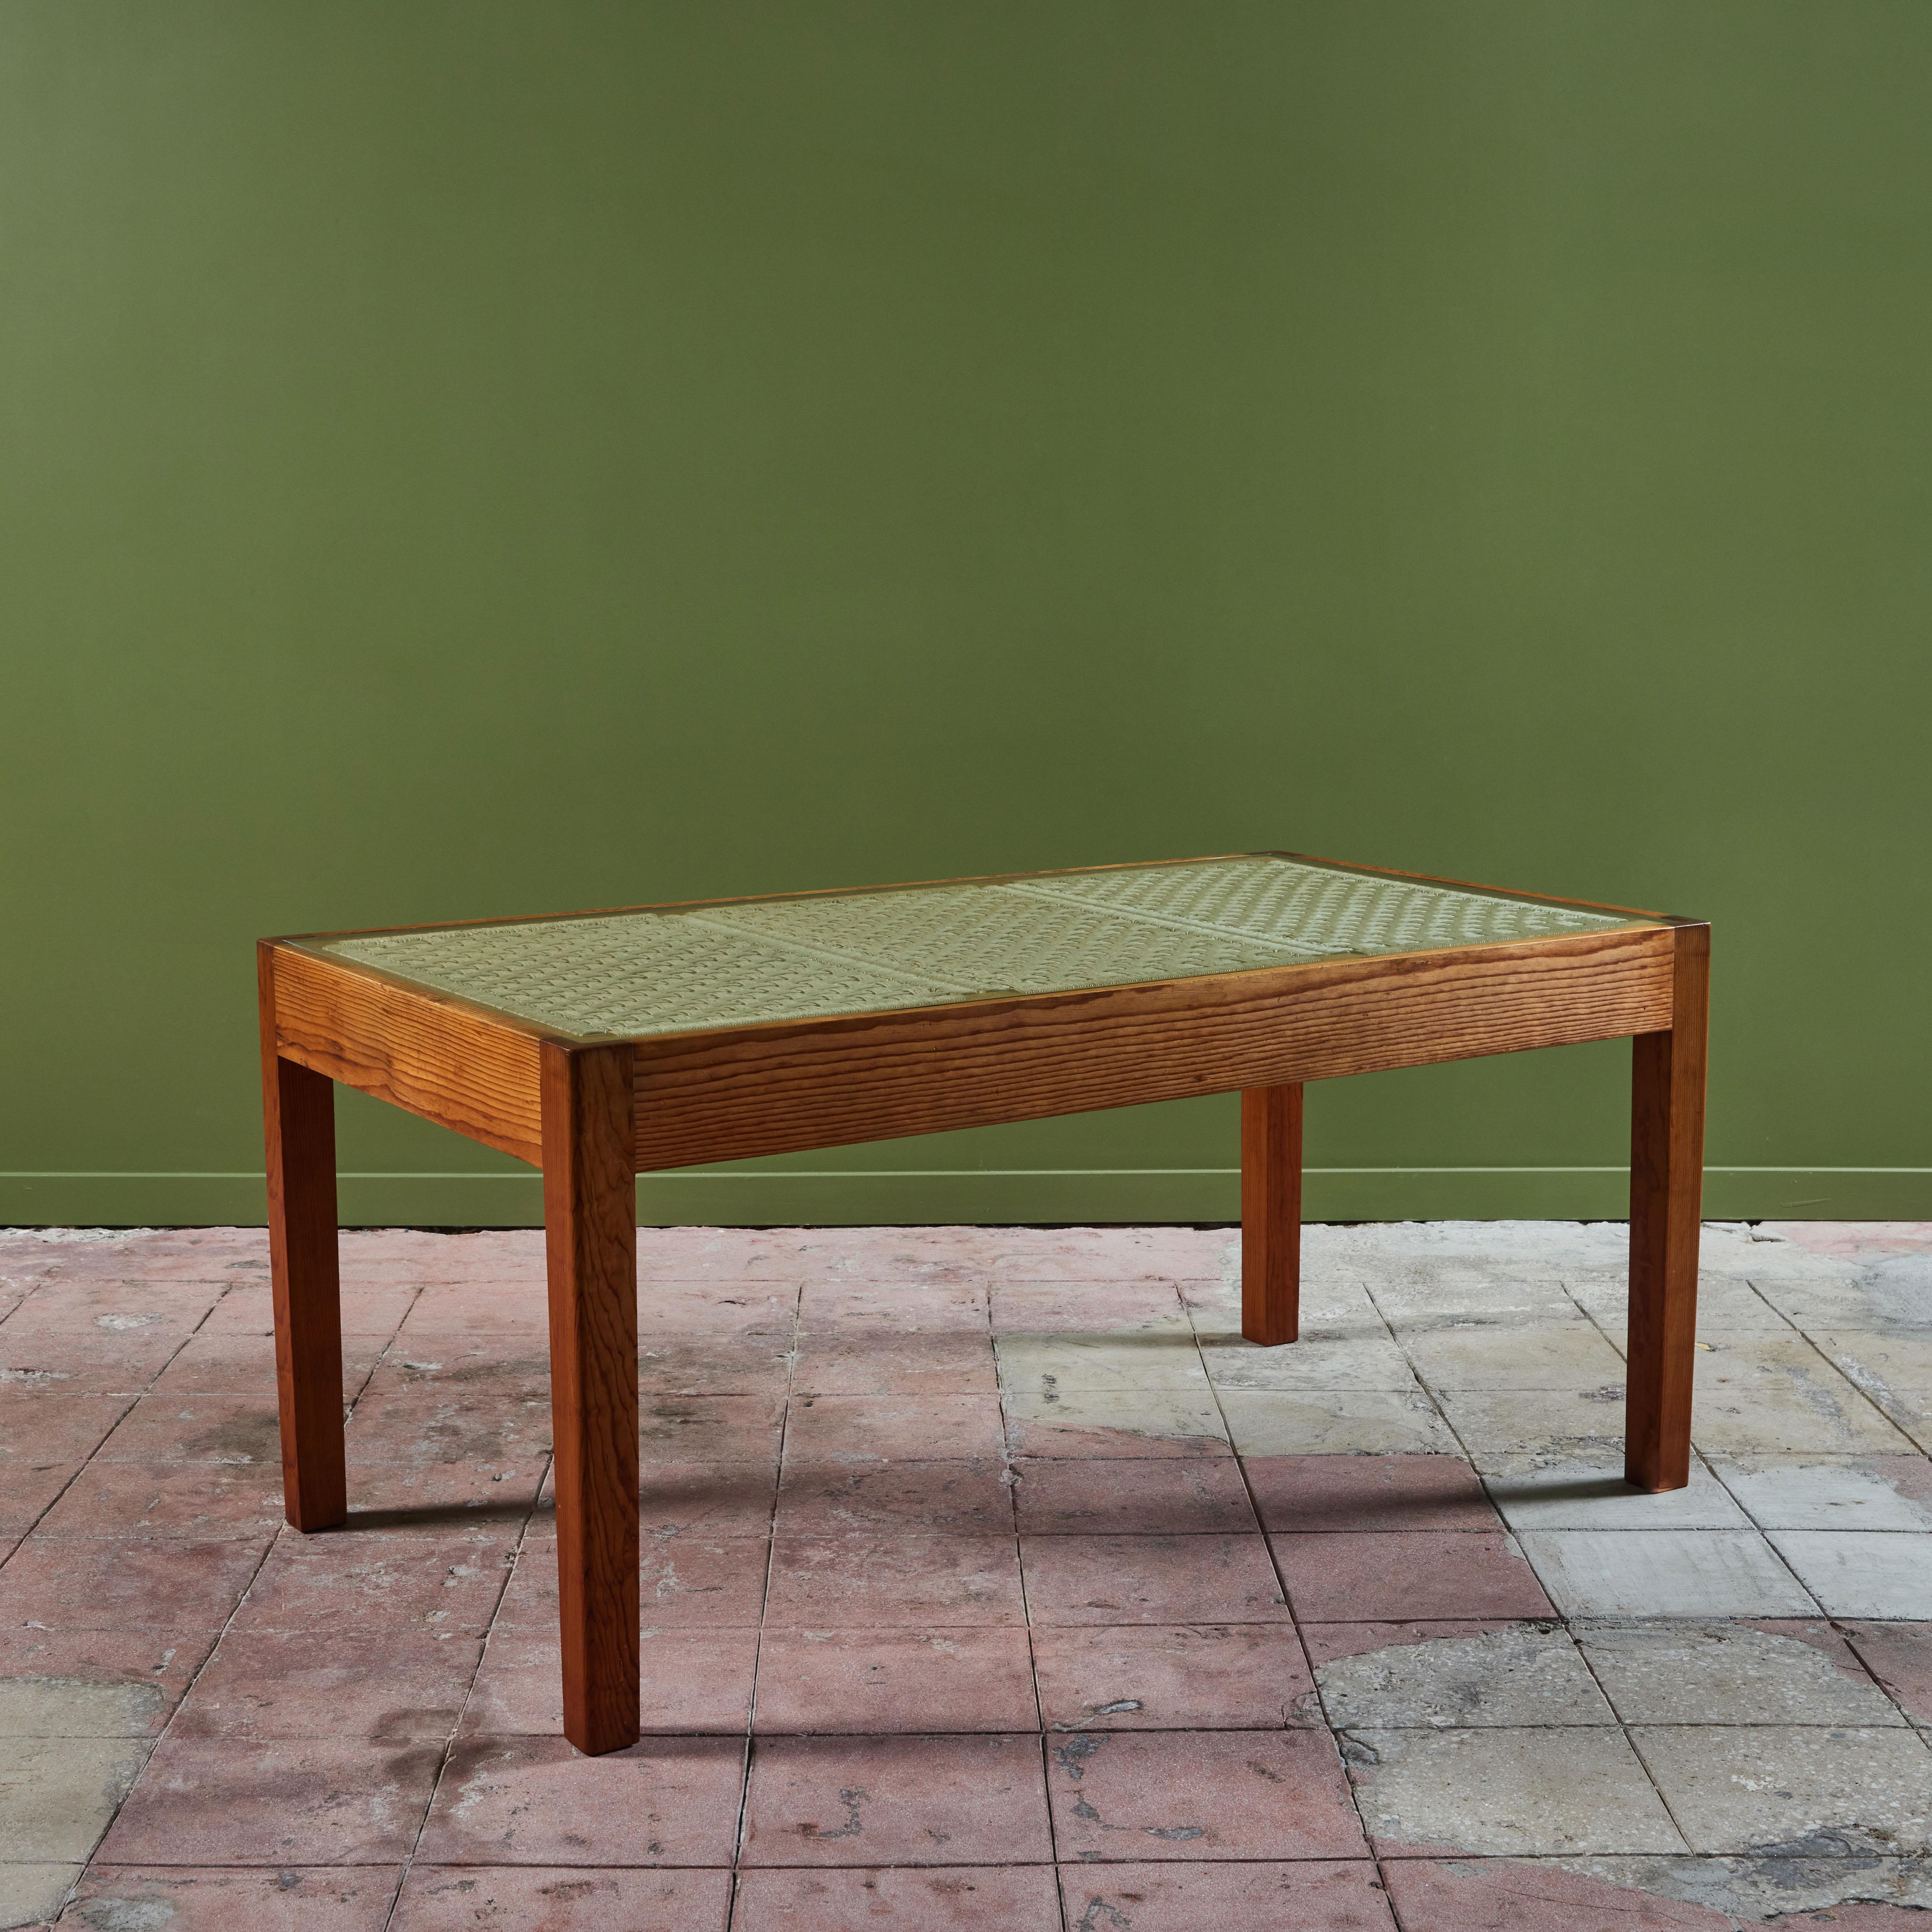 Bauhaus trained, Mexico City based designer Michael van Beuren created highly functional modern pieces inspired by Mexican vernacular styles and materials. This example is a dining table with a rectangular pine frame. The under-frame of the table is